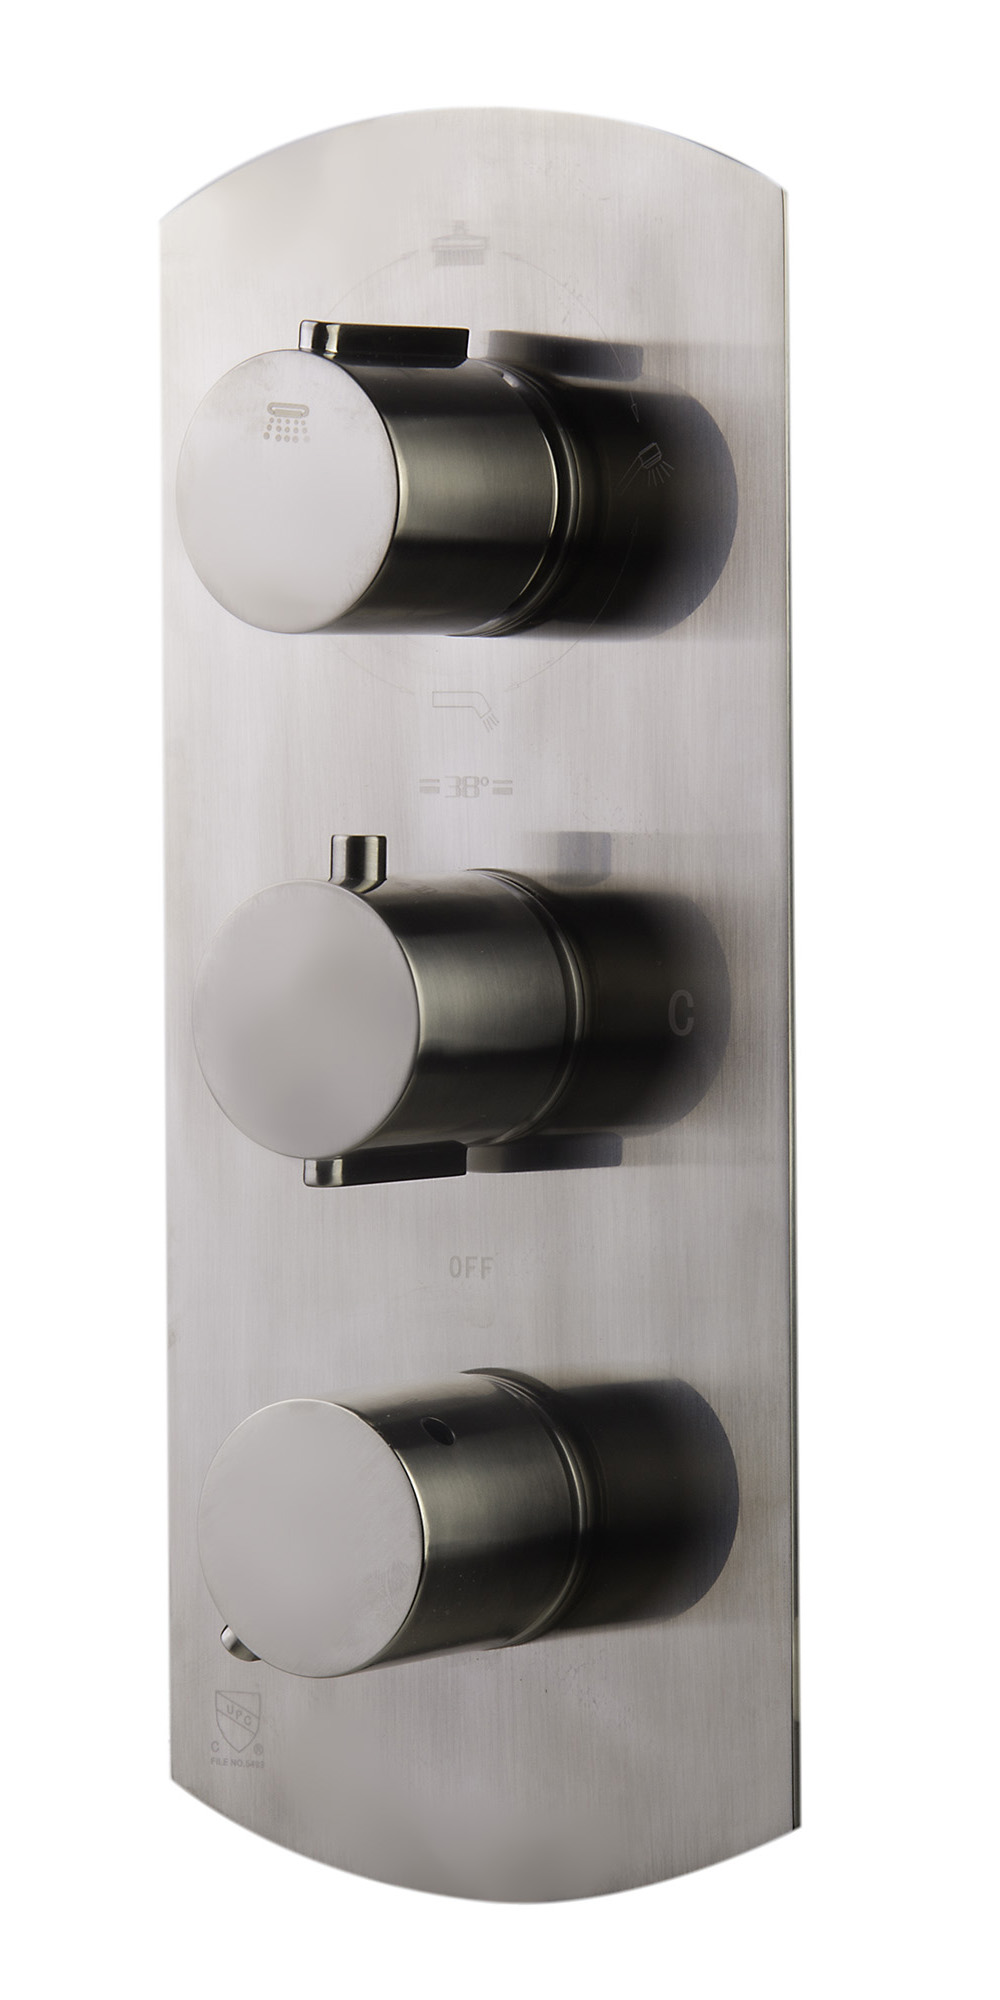 ALFI brand AB4101-BN Brushed Nickel Concealed 4-Way Thermostatic Valve Shower Mixer /w Round Knobs